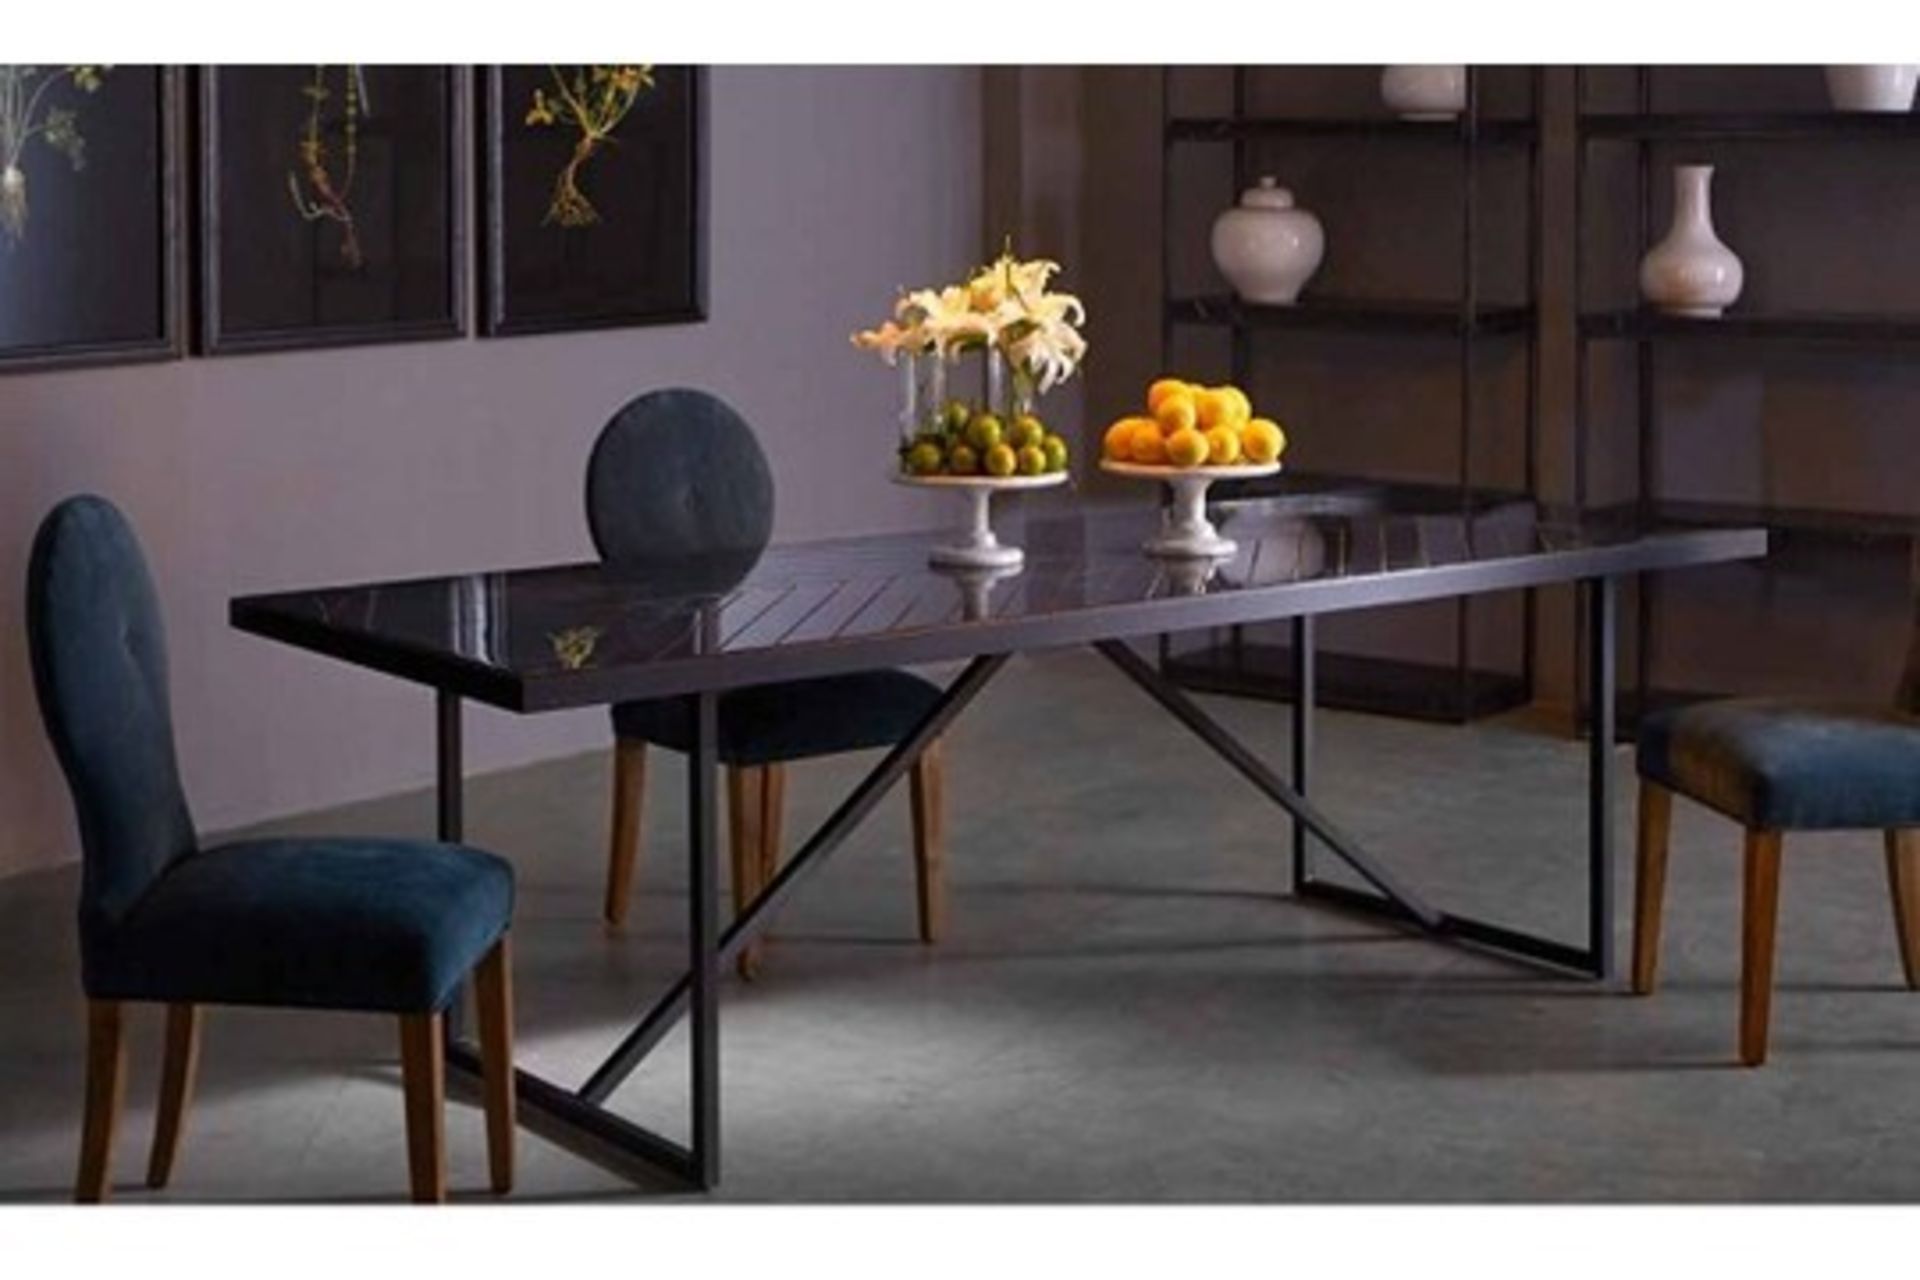 Arrow Dining Table Elegant And Contemporary The Arrow Range Has Been Designed With Hand-Carved Arrow